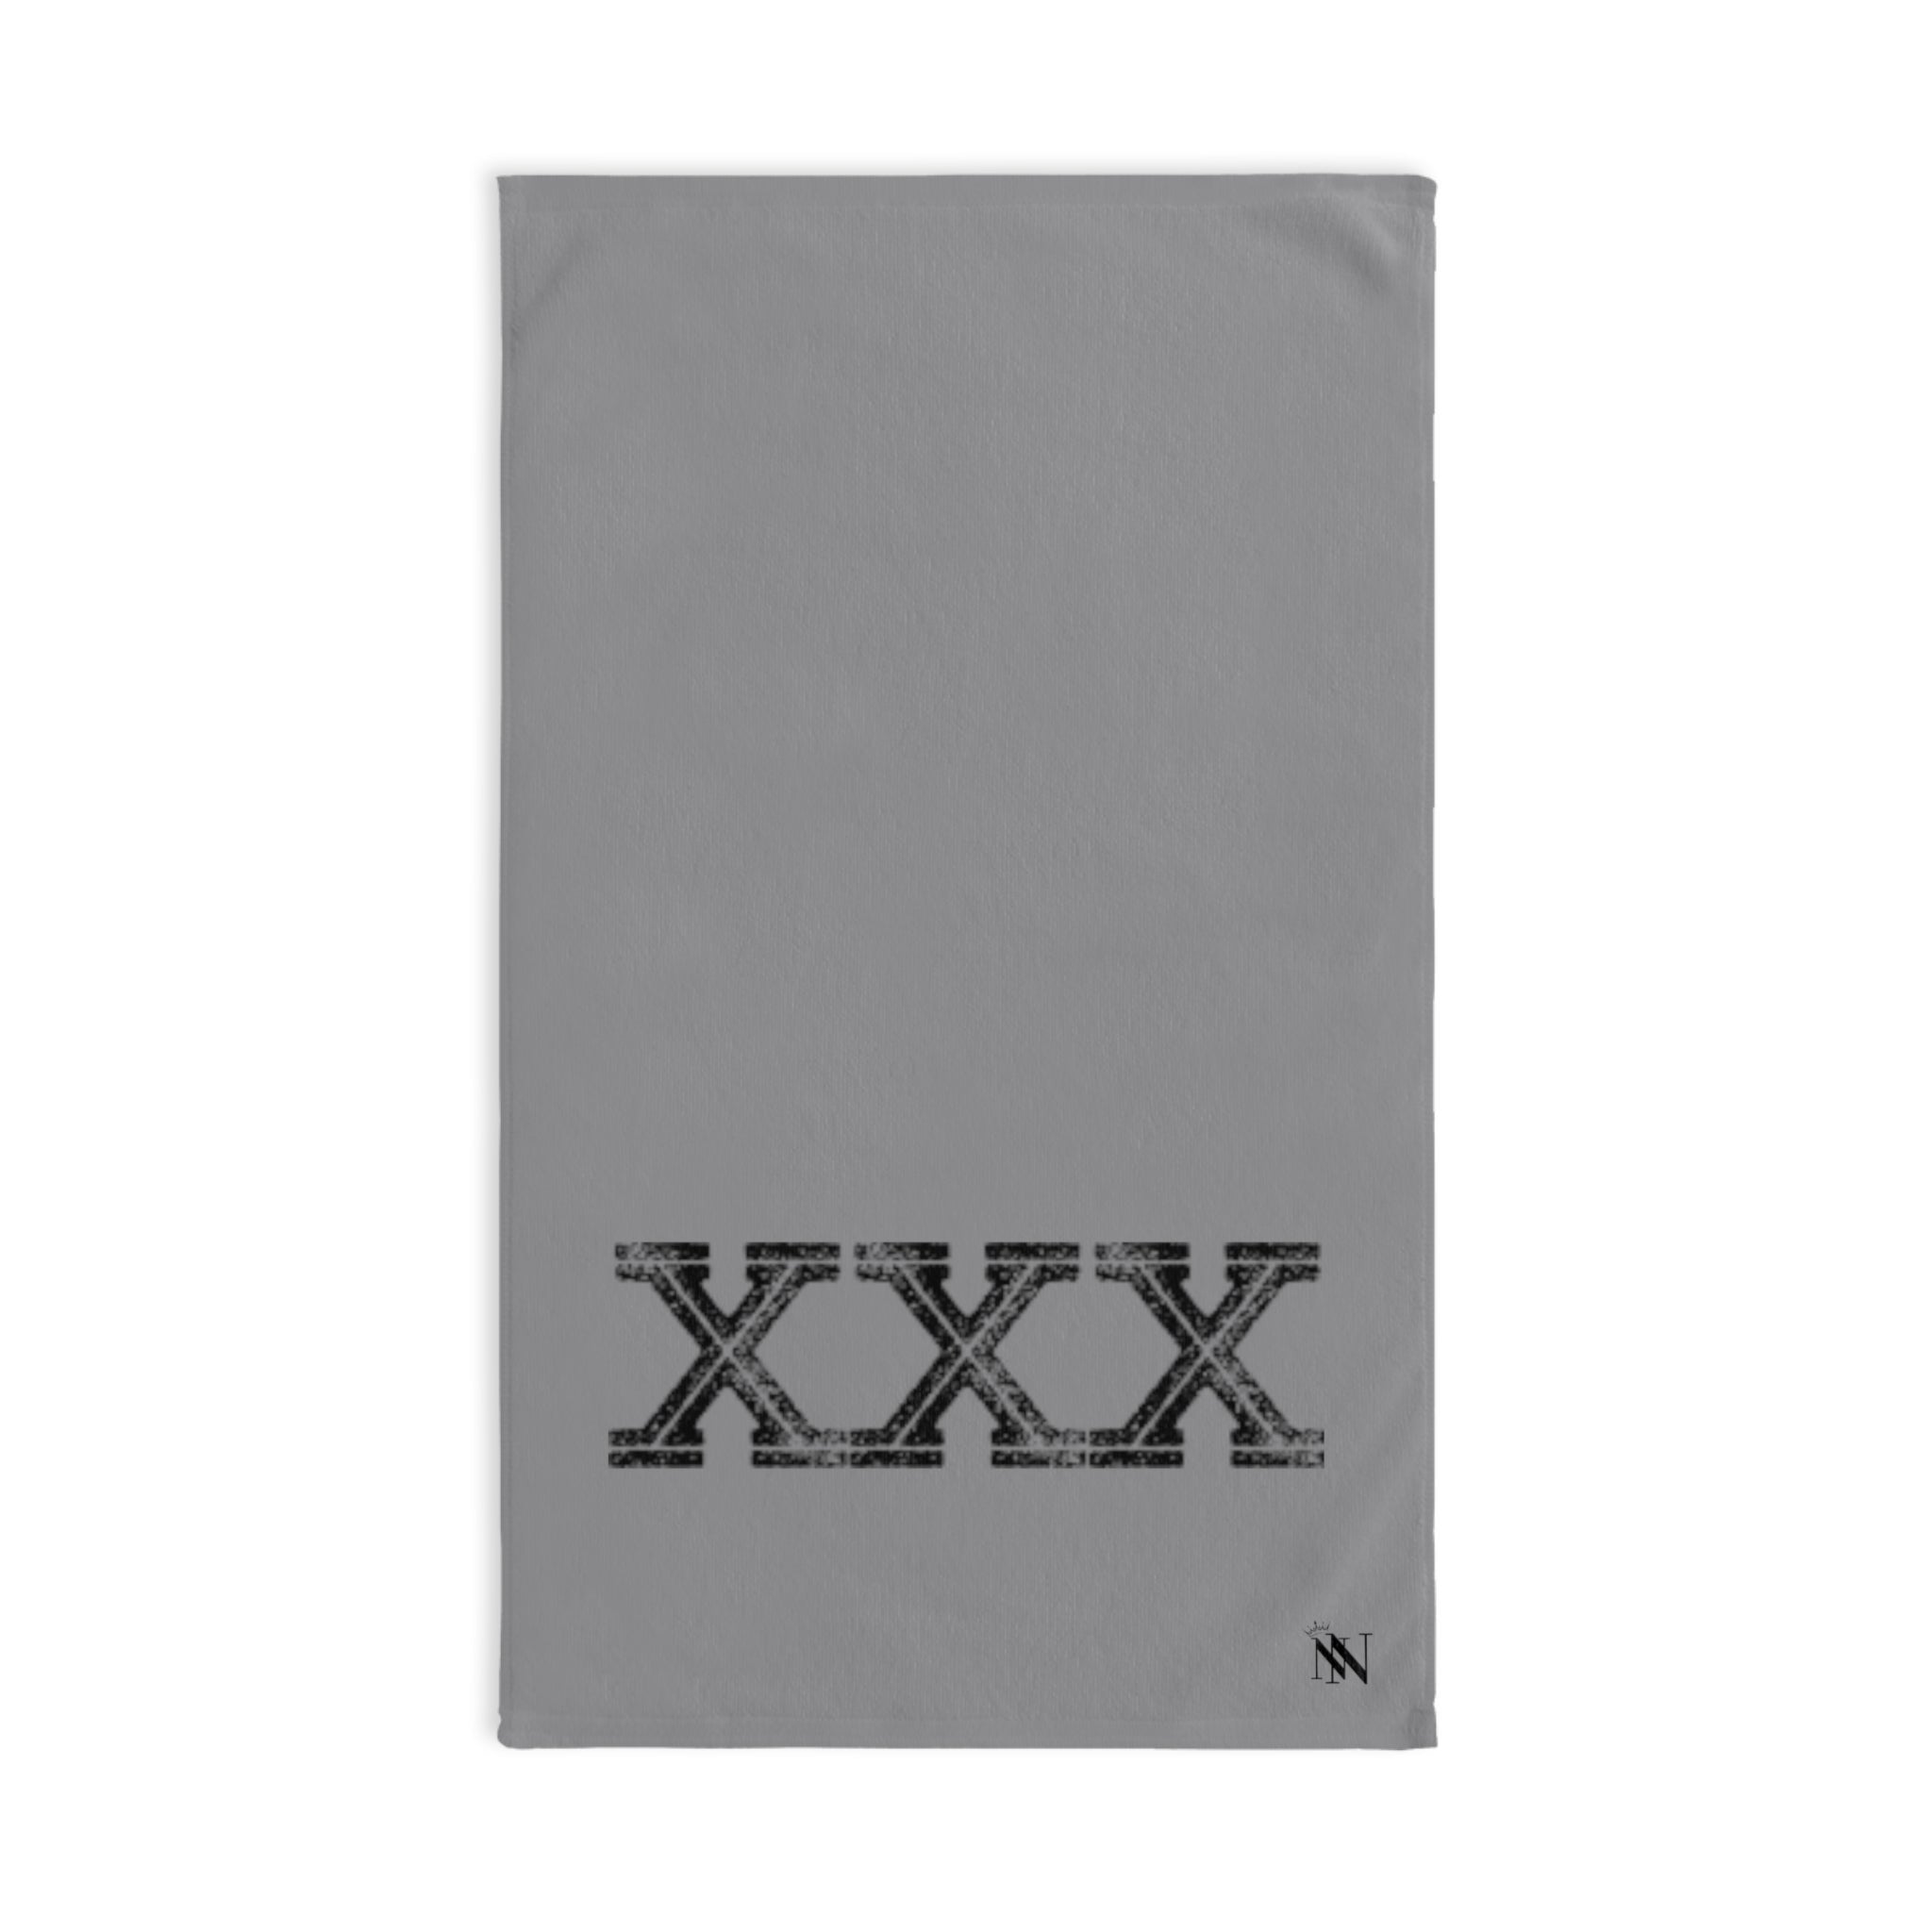 BLK XXX Triple Rated Grey | Anniversary Wedding, Christmas, Valentines Day, Birthday Gifts for Him, Her, Romantic Gifts for Wife, Girlfriend, Couples Gifts for Boyfriend, Husband NECTAR NAPKINS